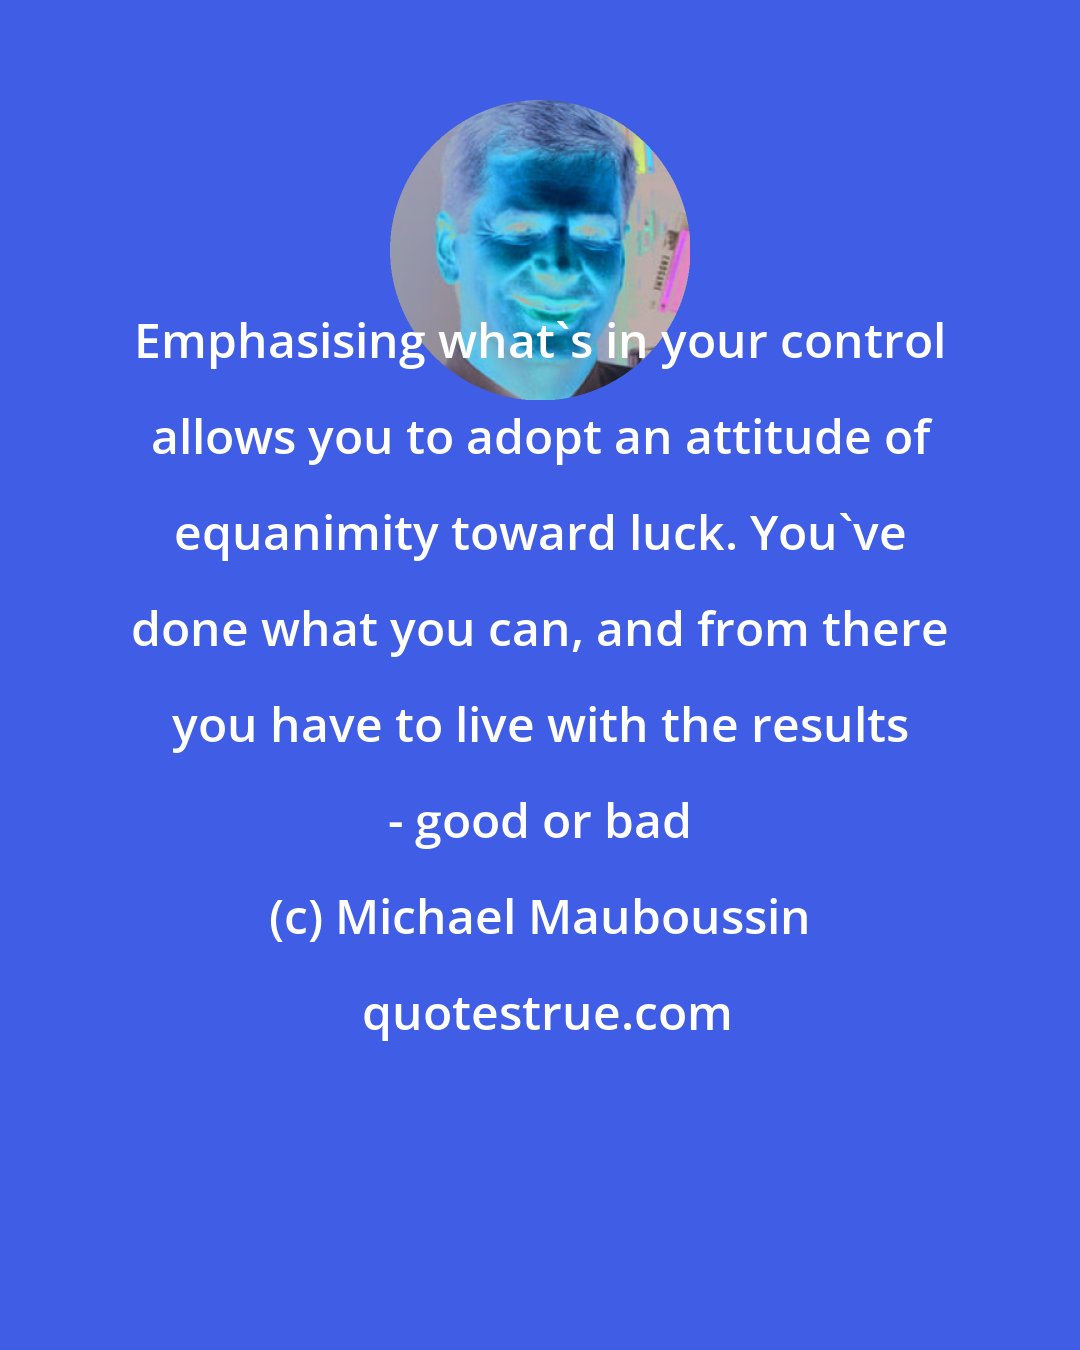 Michael Mauboussin: Emphasising what's in your control allows you to adopt an attitude of equanimity toward luck. You've done what you can, and from there you have to live with the results - good or bad